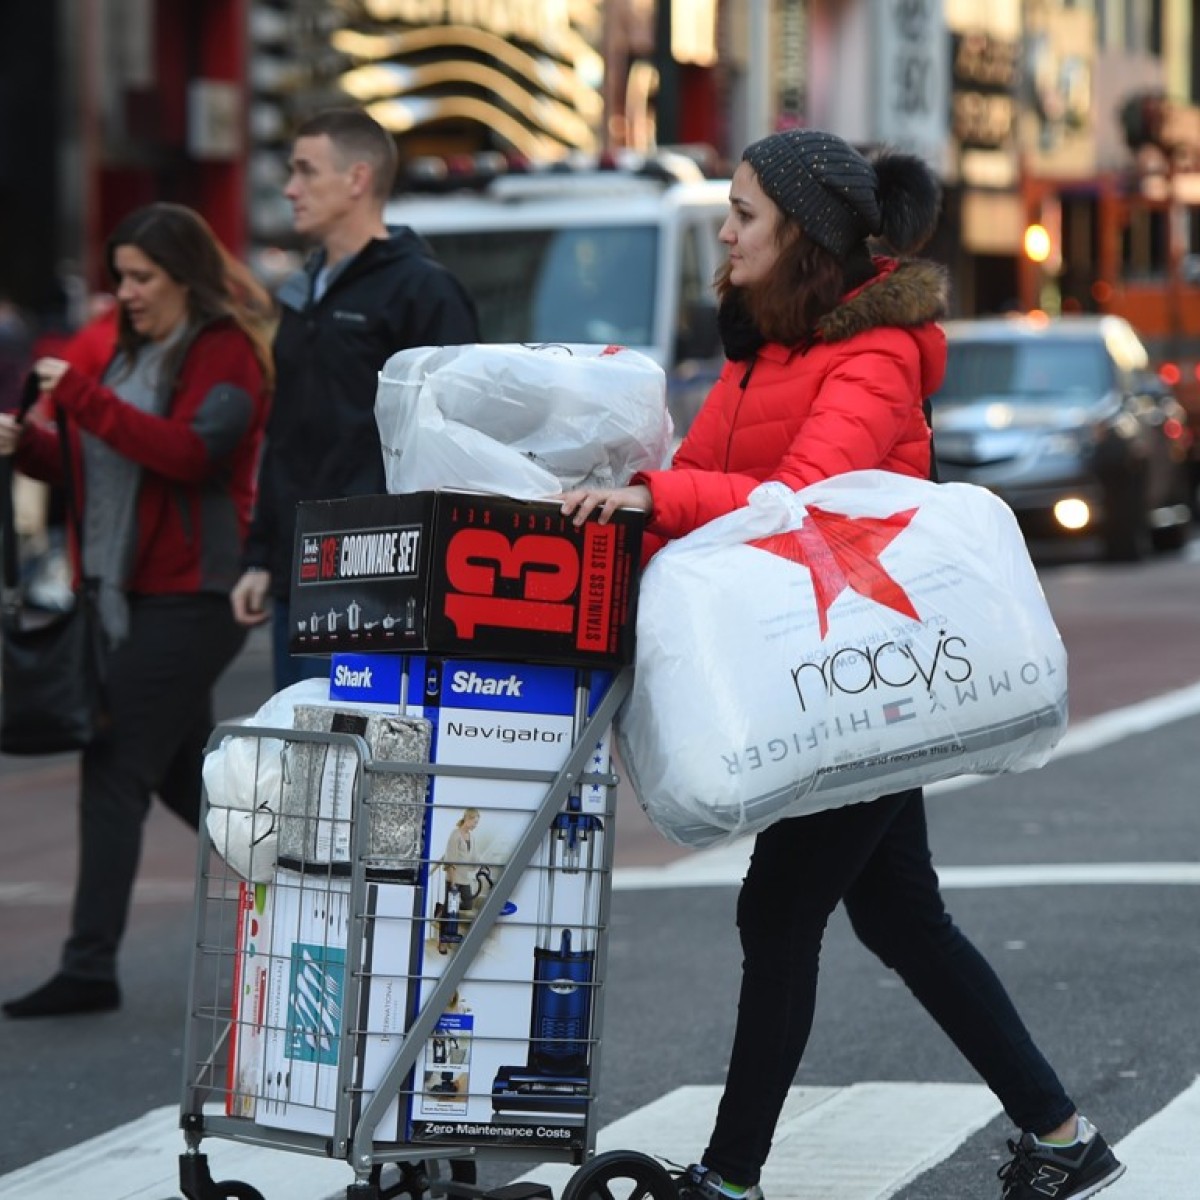 To bet on China's shoppers, ditch its companies